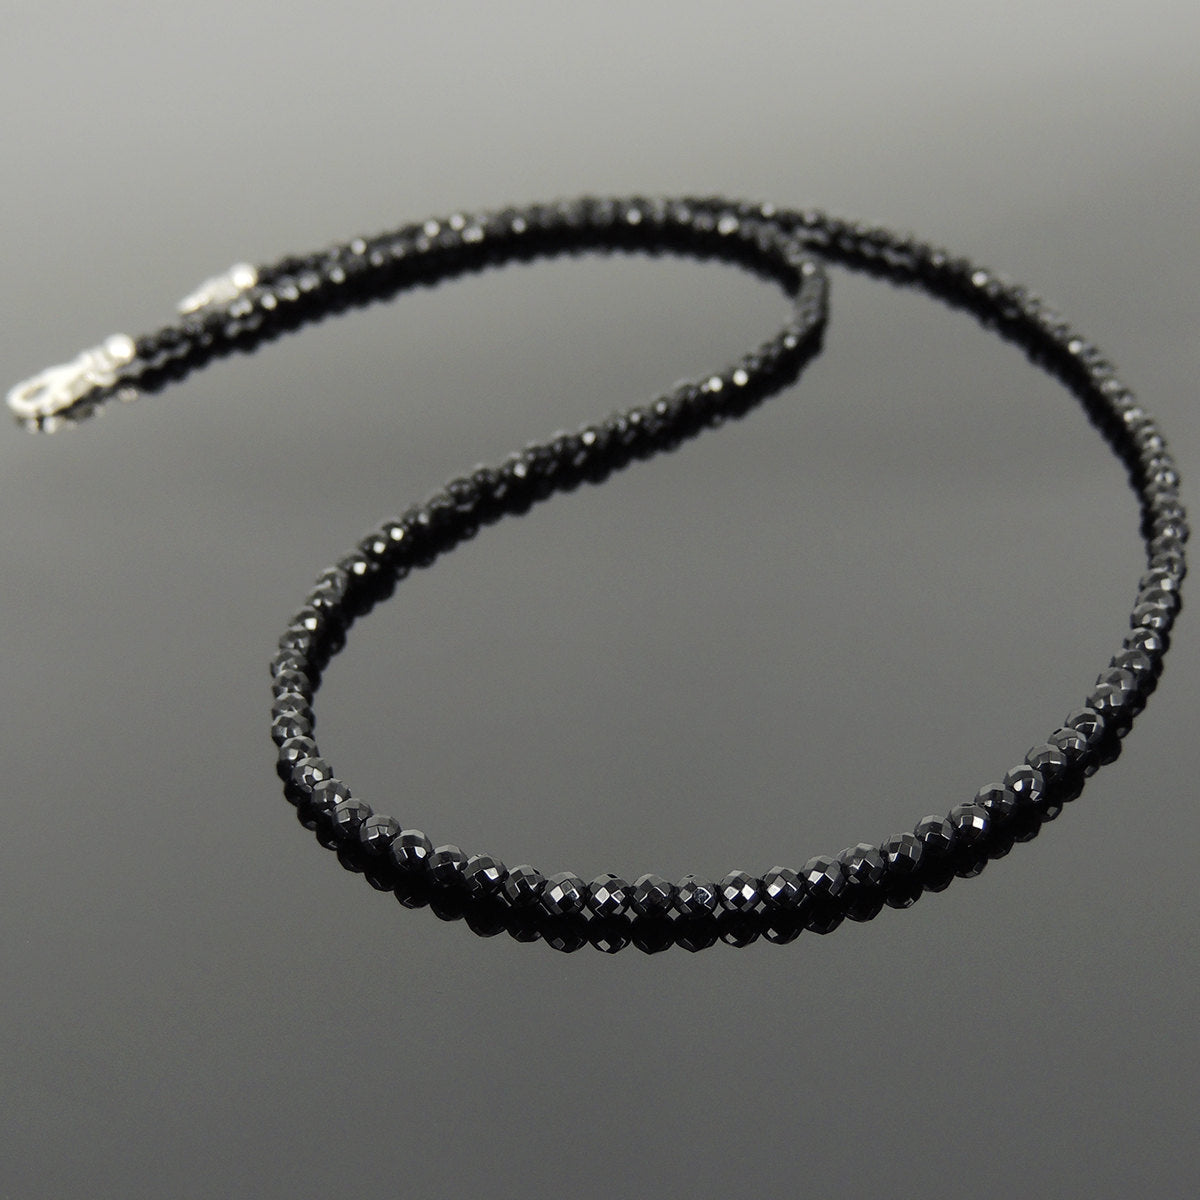 3mm Faceted Bright Black Onyx Healing Gemstone Necklace with S925 Sterling Silver Spacer Beads & Clasp - Handmade by Gem & Silver NK136